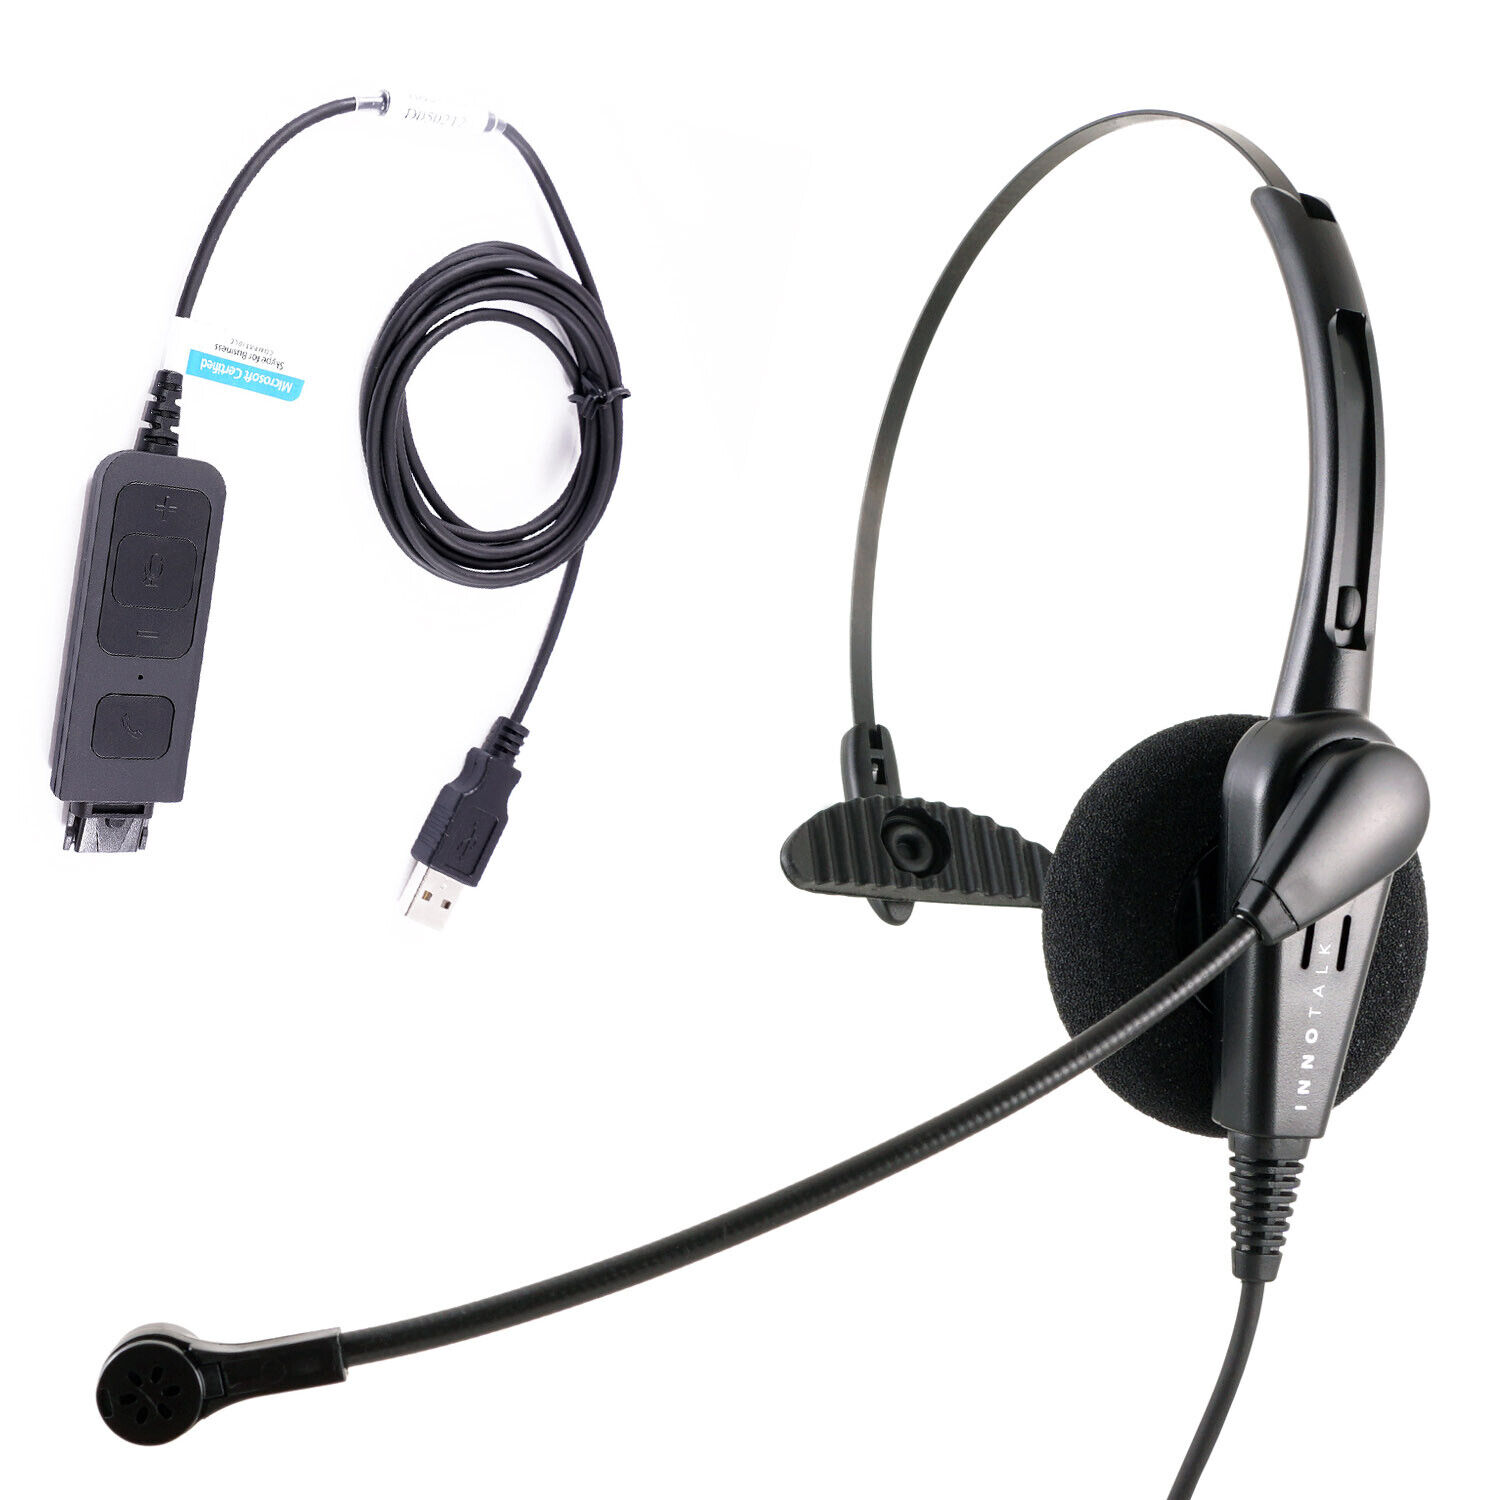 Cost Effective Pro Monaural Computer Headset for PC at Office, Customer service.